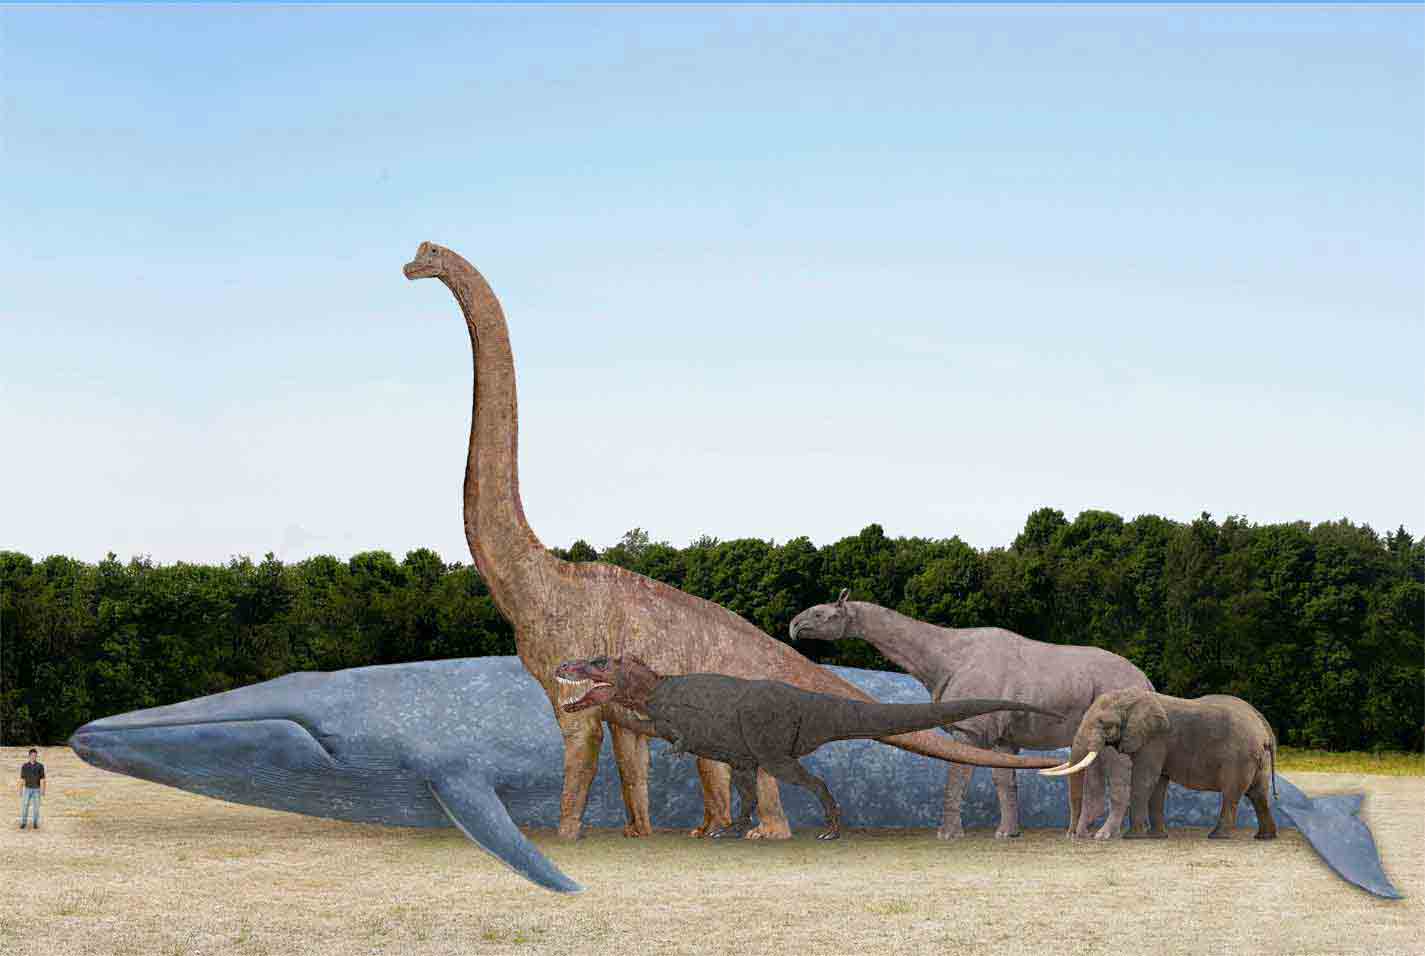 Whale watching Sri Lank - Blue whale comparison with dinosaurs